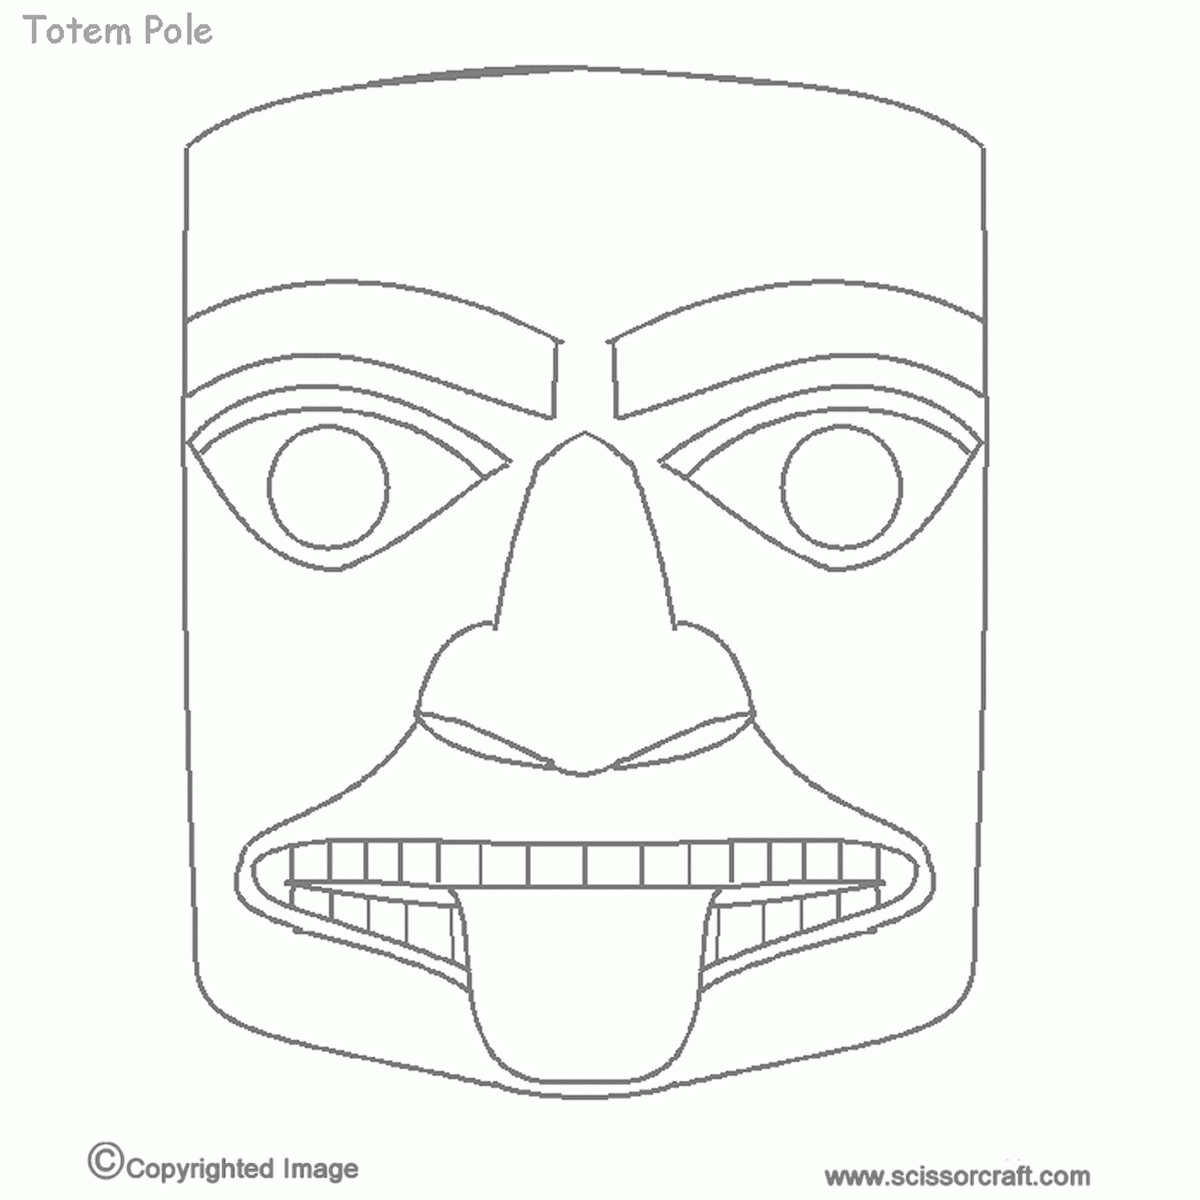 Totem Pole Coloring Pictures - Coloring Pages for Kids and for Adults